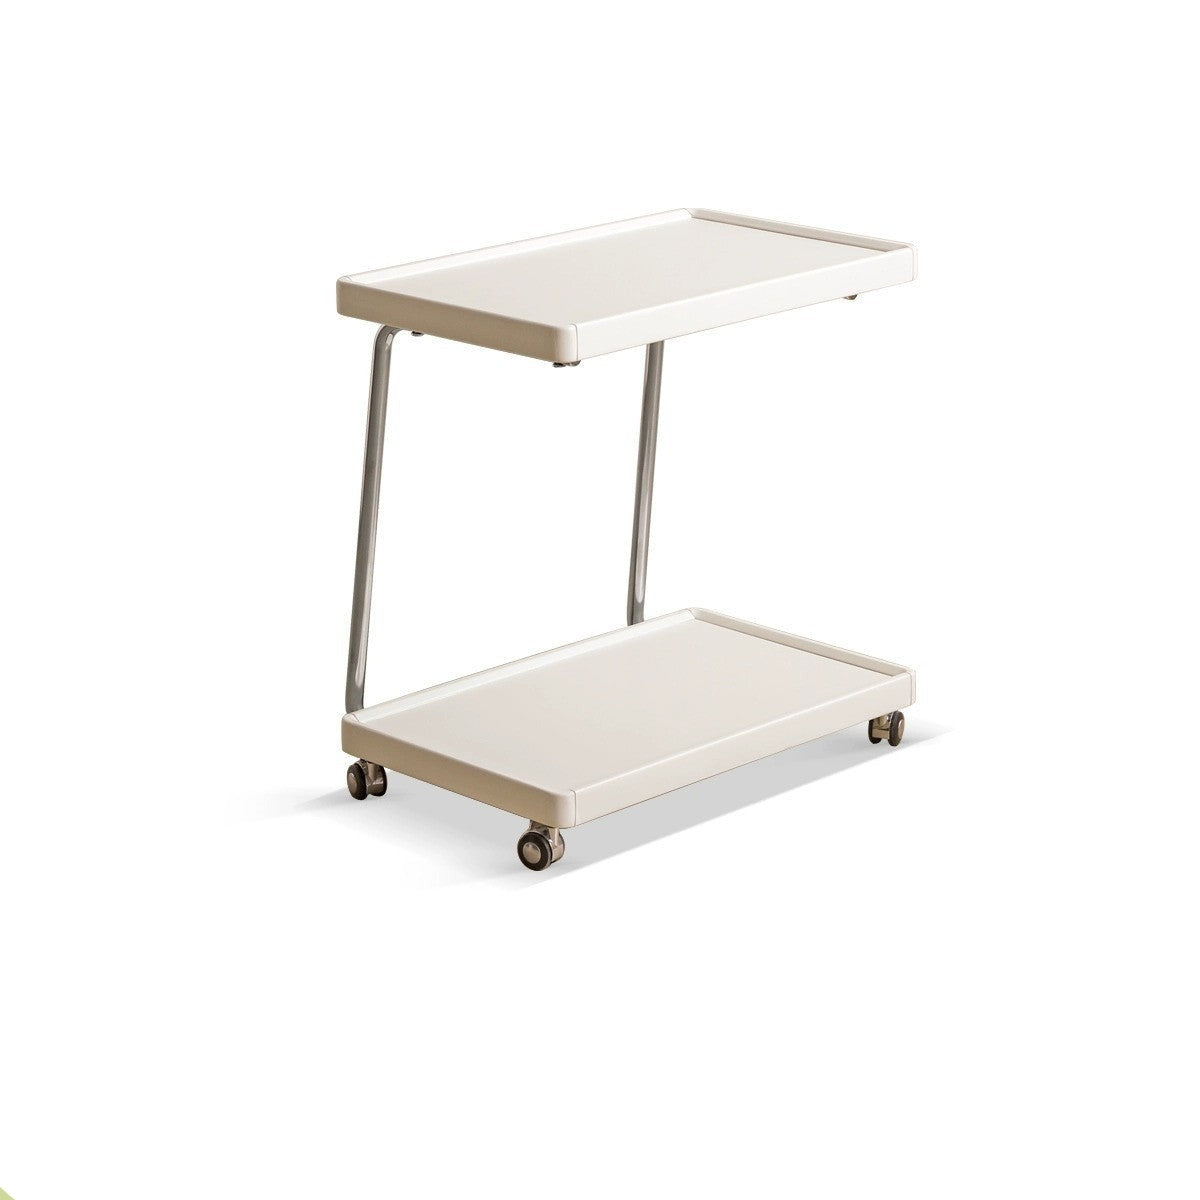 Solid Wood Edge Table C-type mobile  "